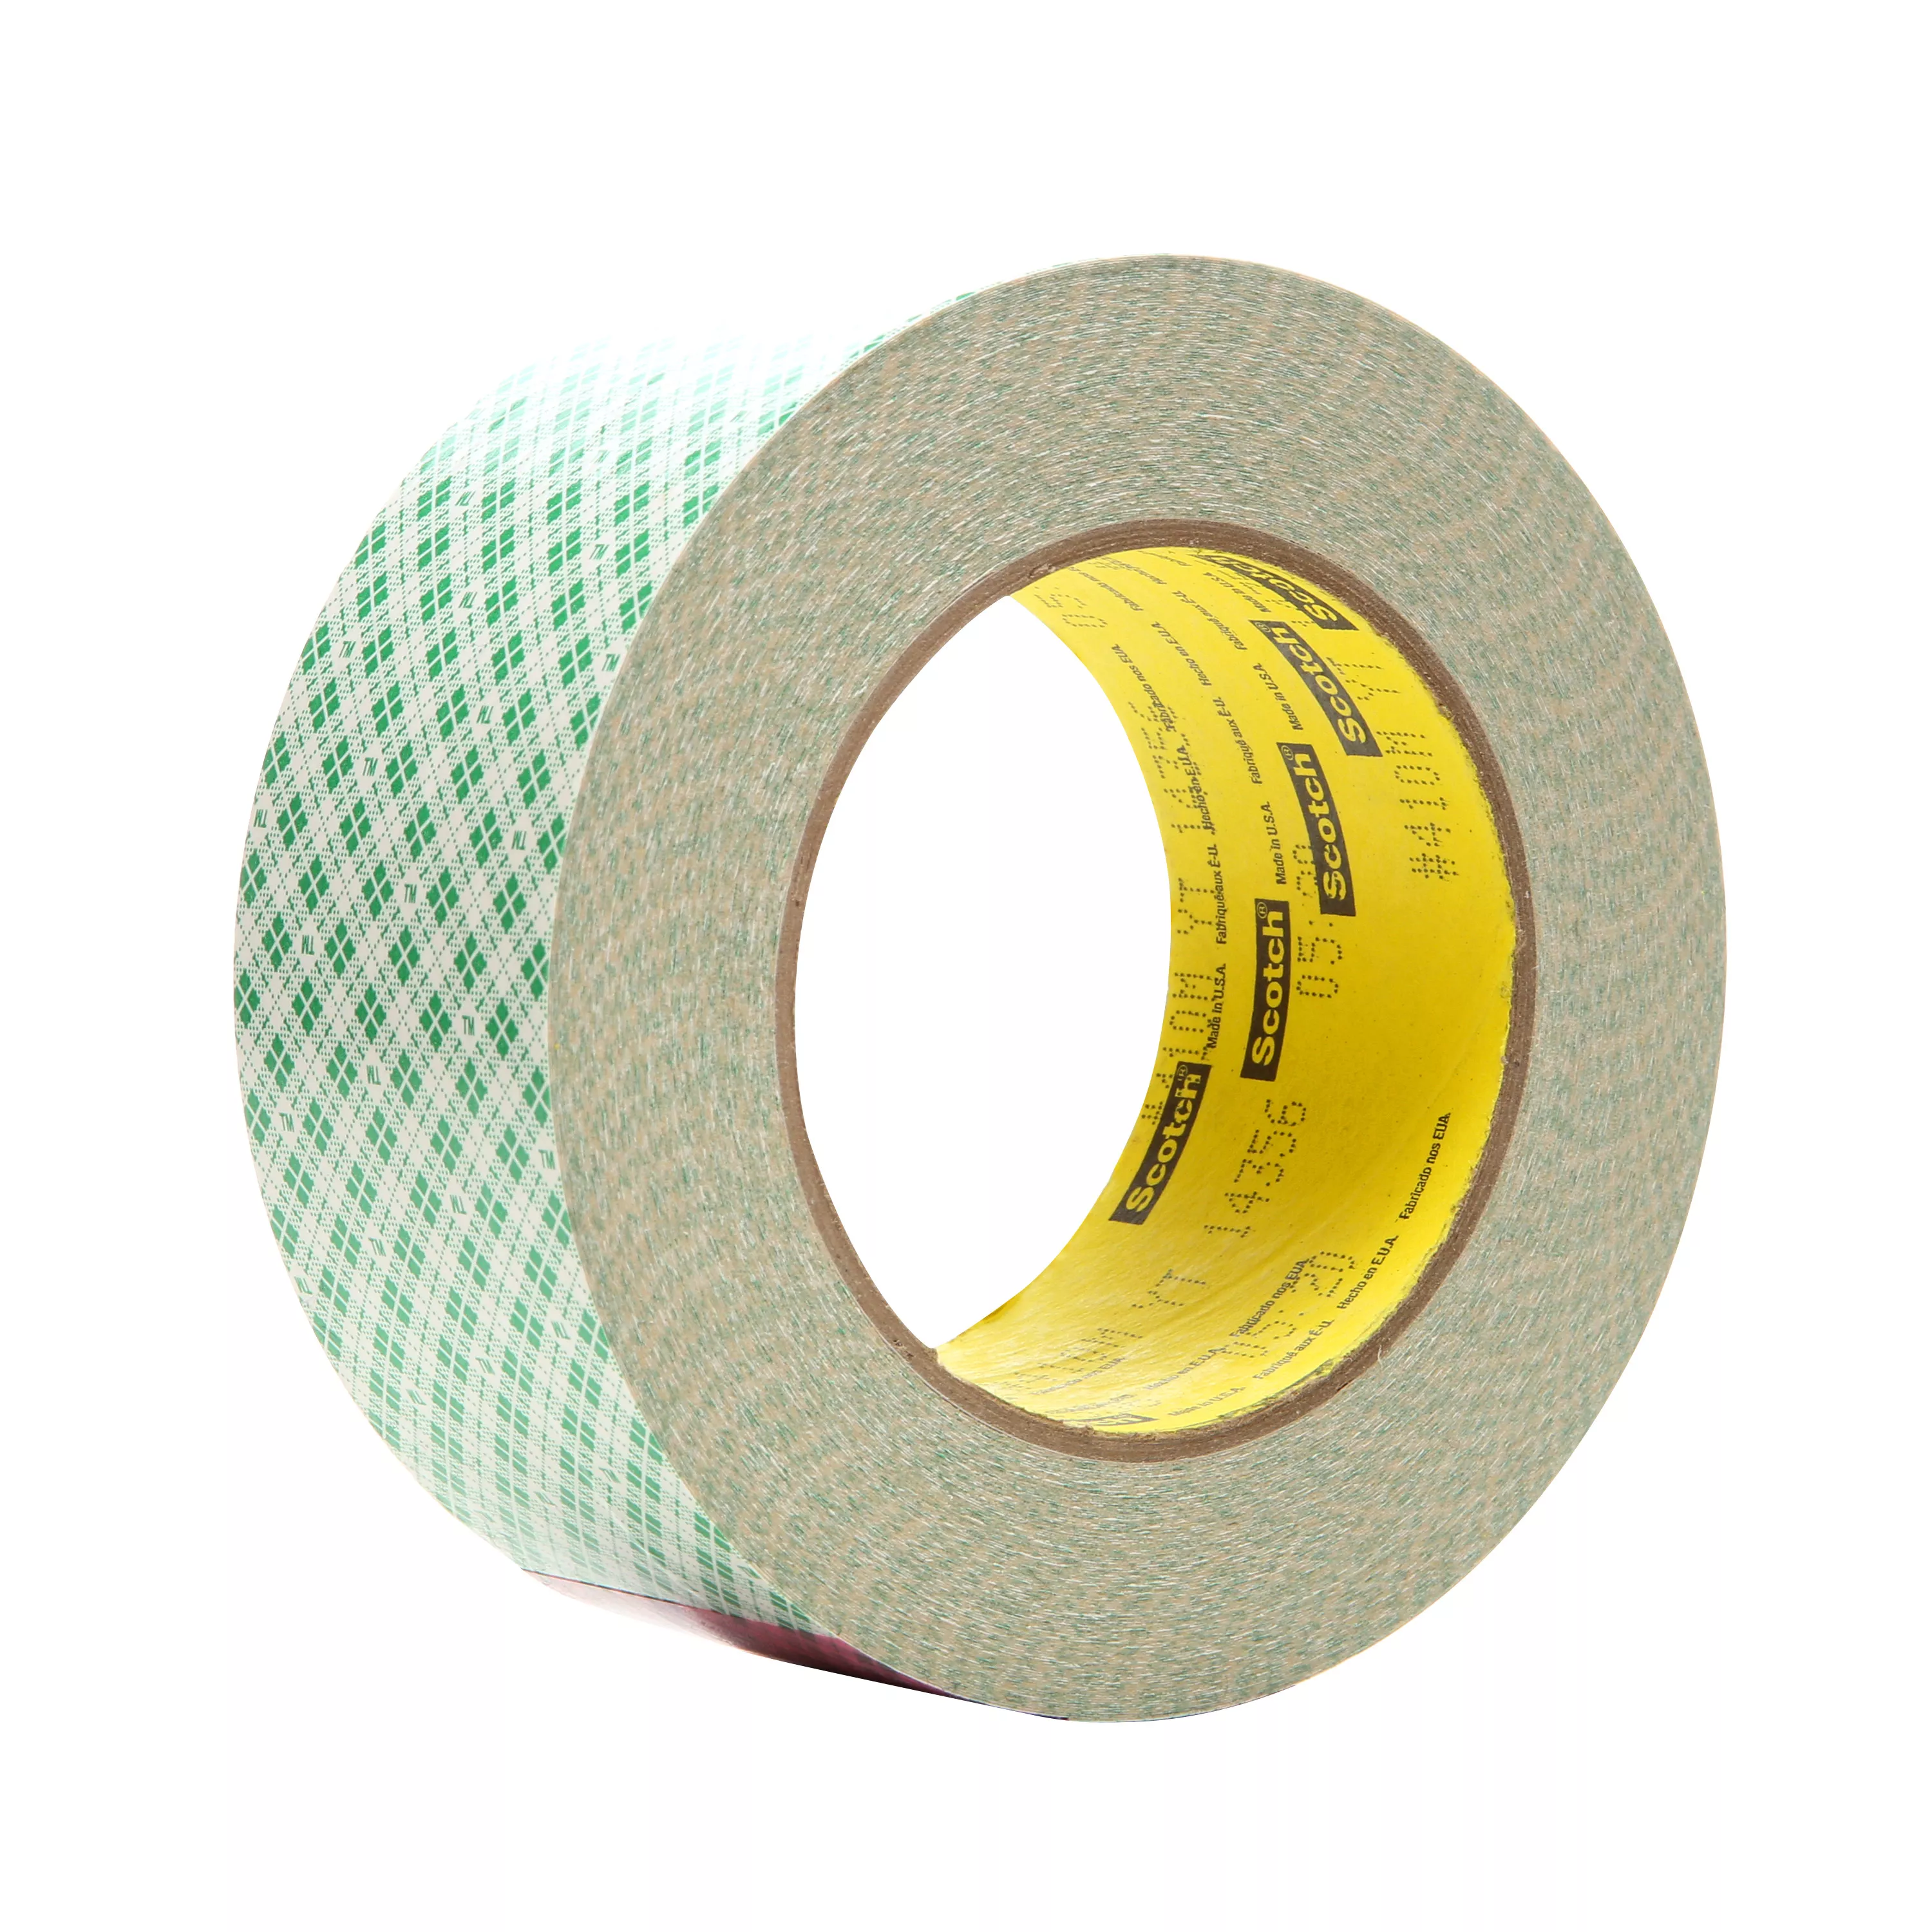 SKU 7000049275 | 3M™ Double Coated Paper Tape 410M